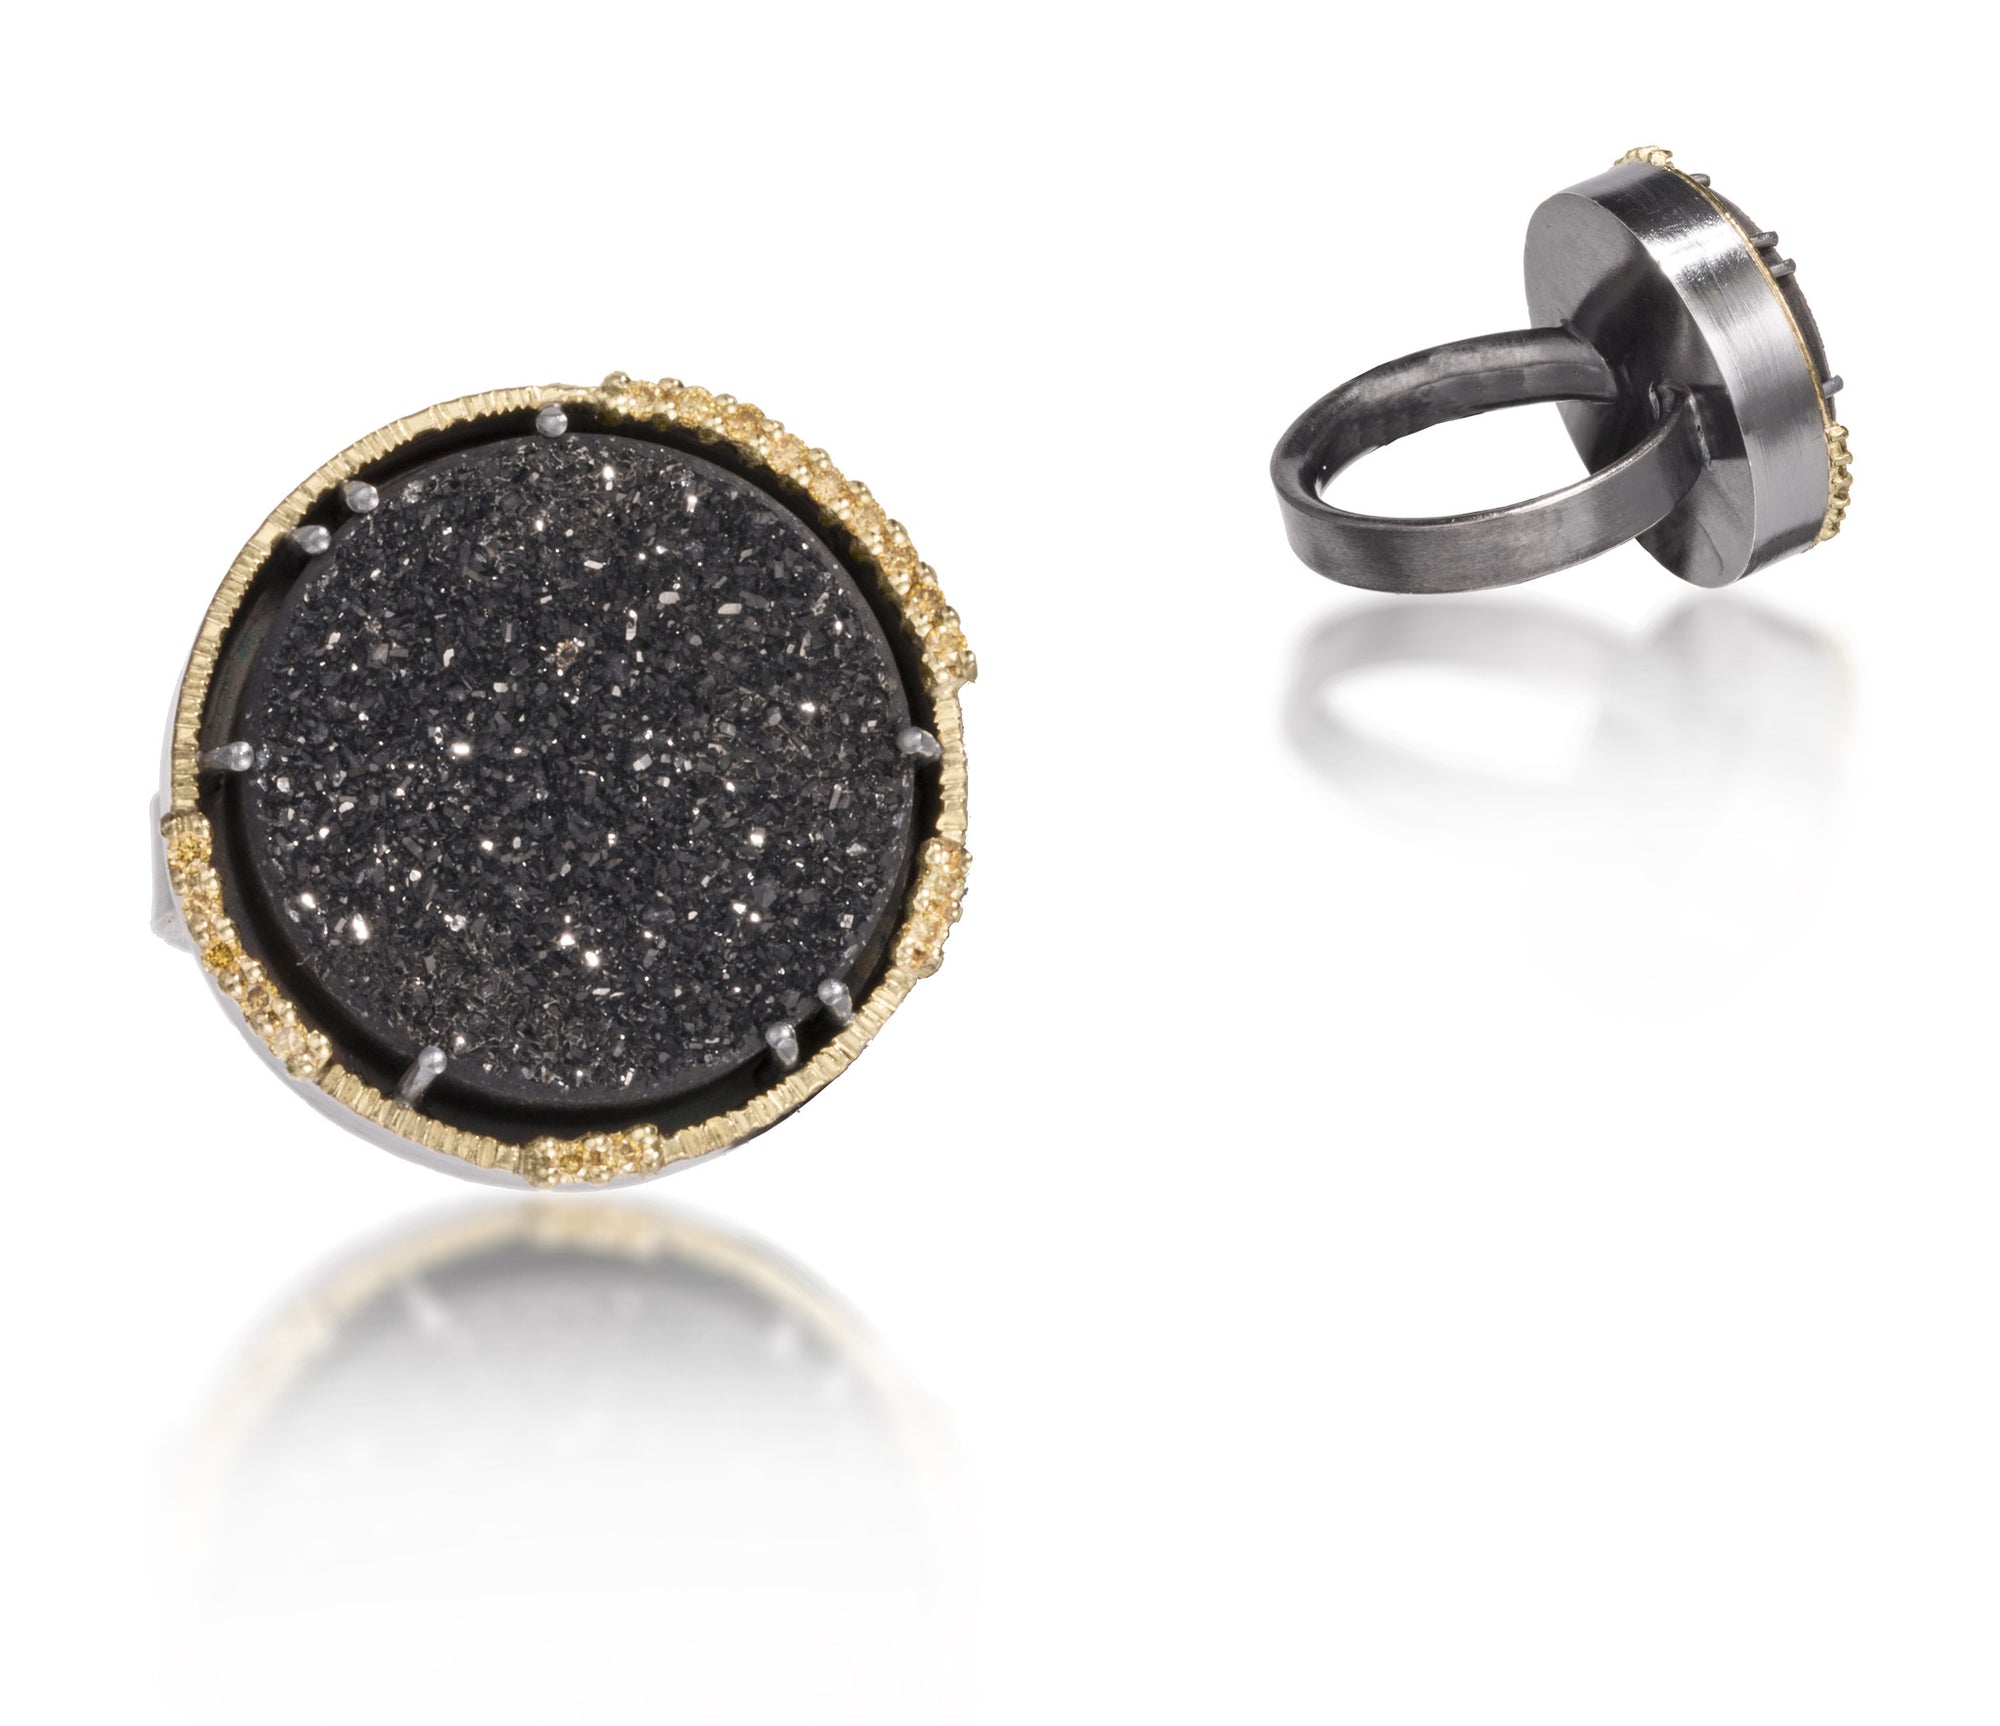 Spiral Ring #4 in 18k gold backed with oxidized sterling silver, prong set black drusy and natural yellow diamonds. Hand fabricated, hammer textured. Comfort band. 18mm black drusy.